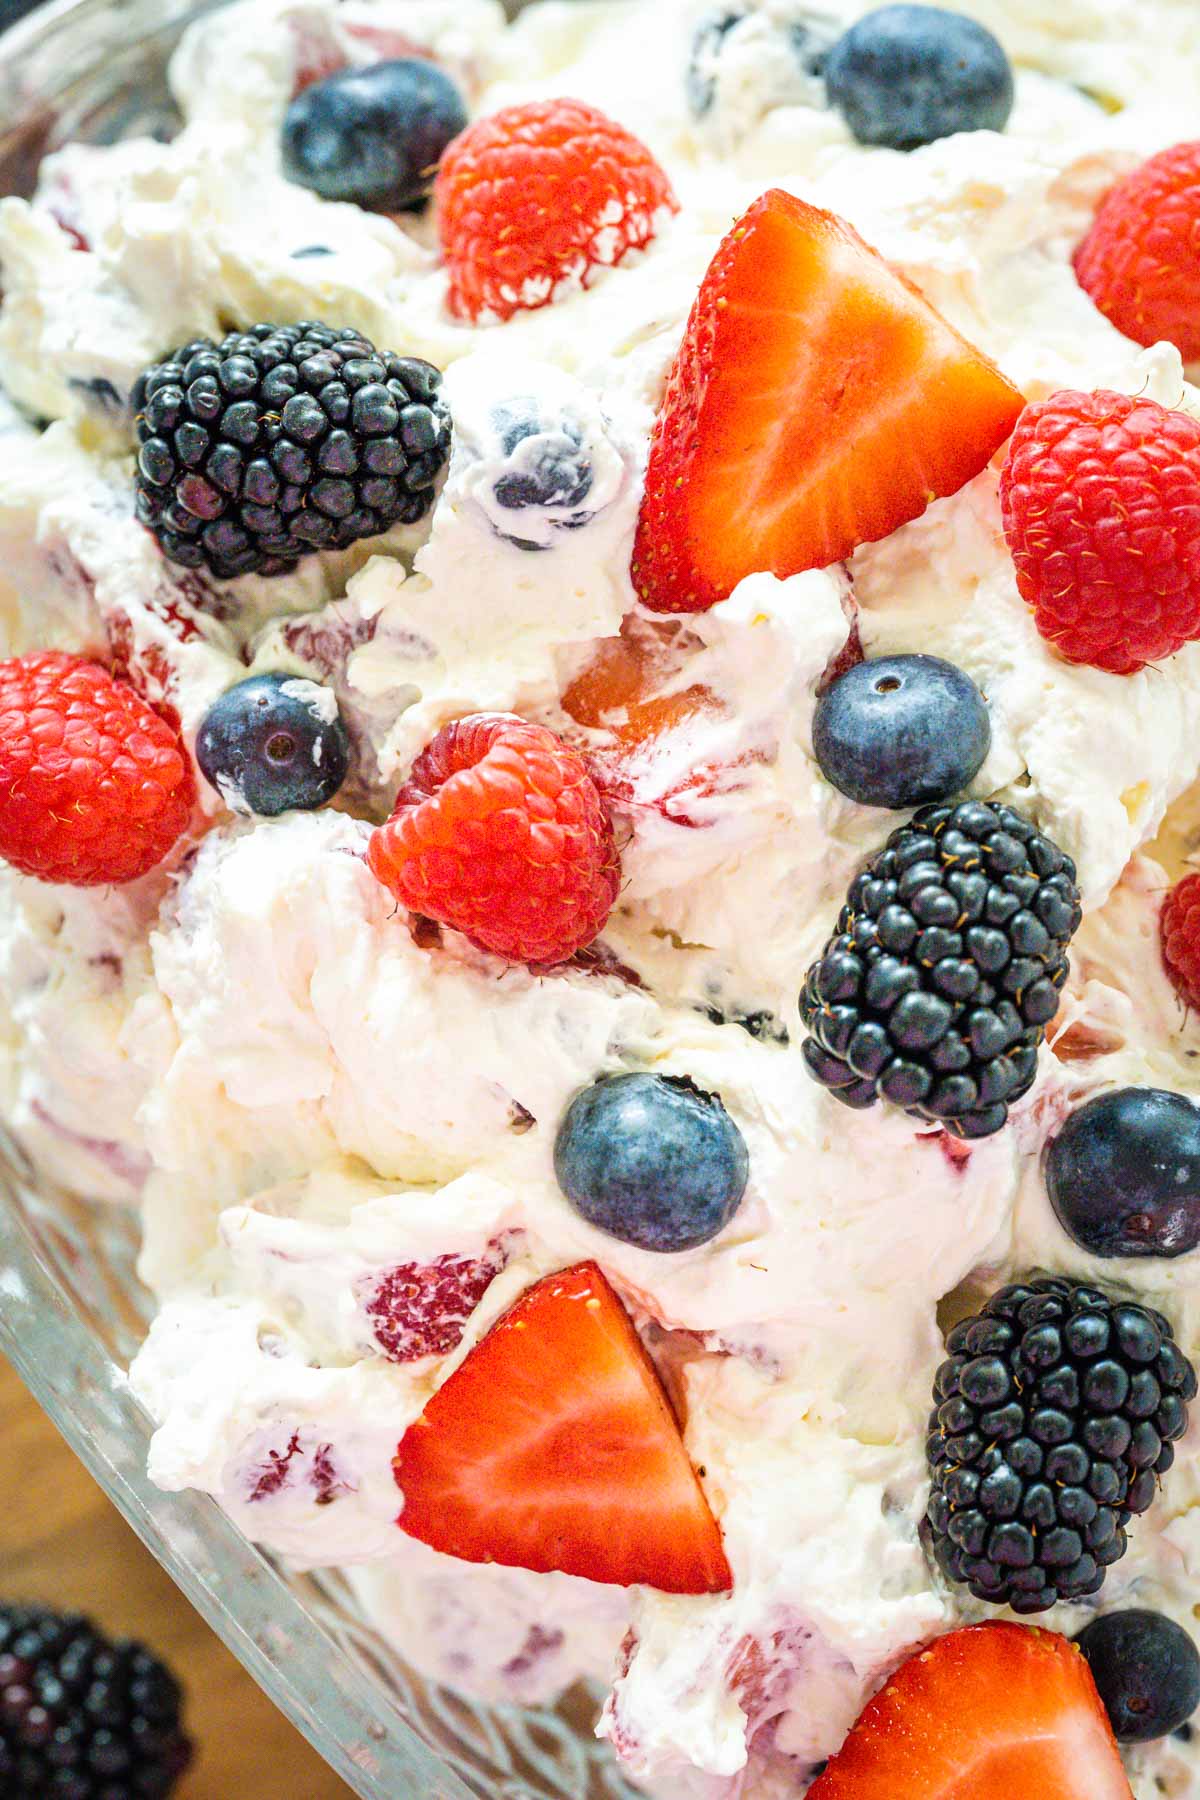 Up close image showing creamy cheesecake filling and fresh berries that make up a berry cheesecake salad recipe.